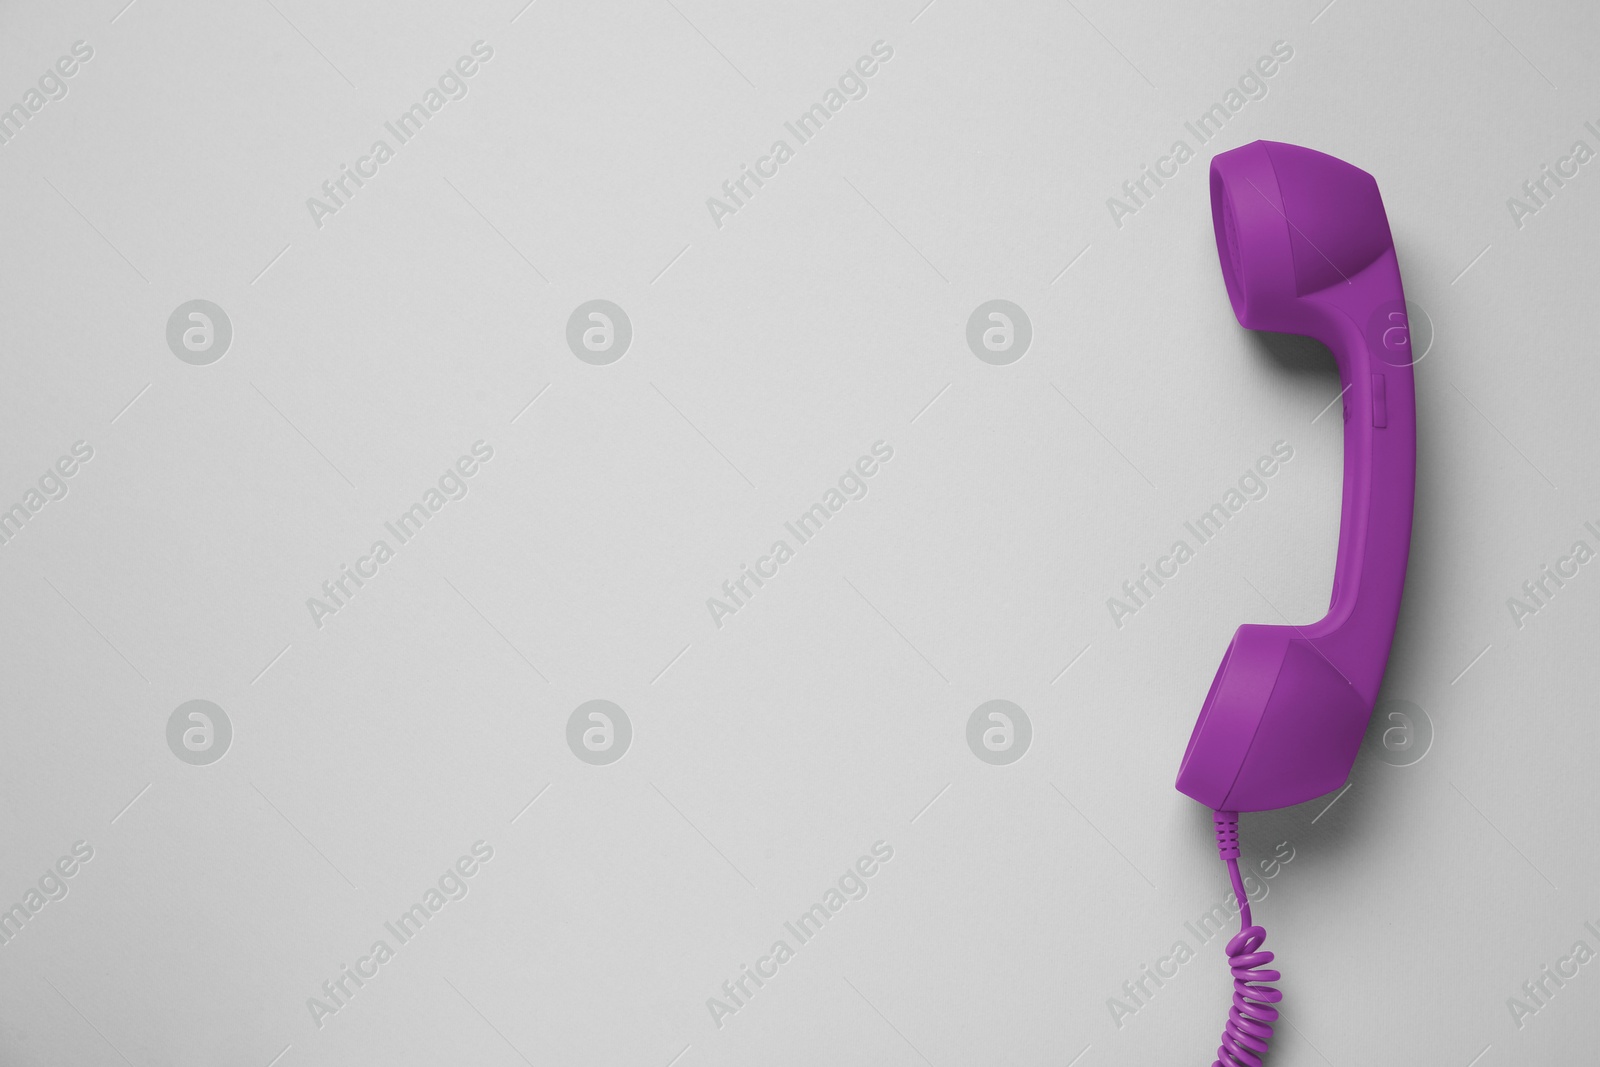 Image of Purple telephone handset on light background, top view. Space for text